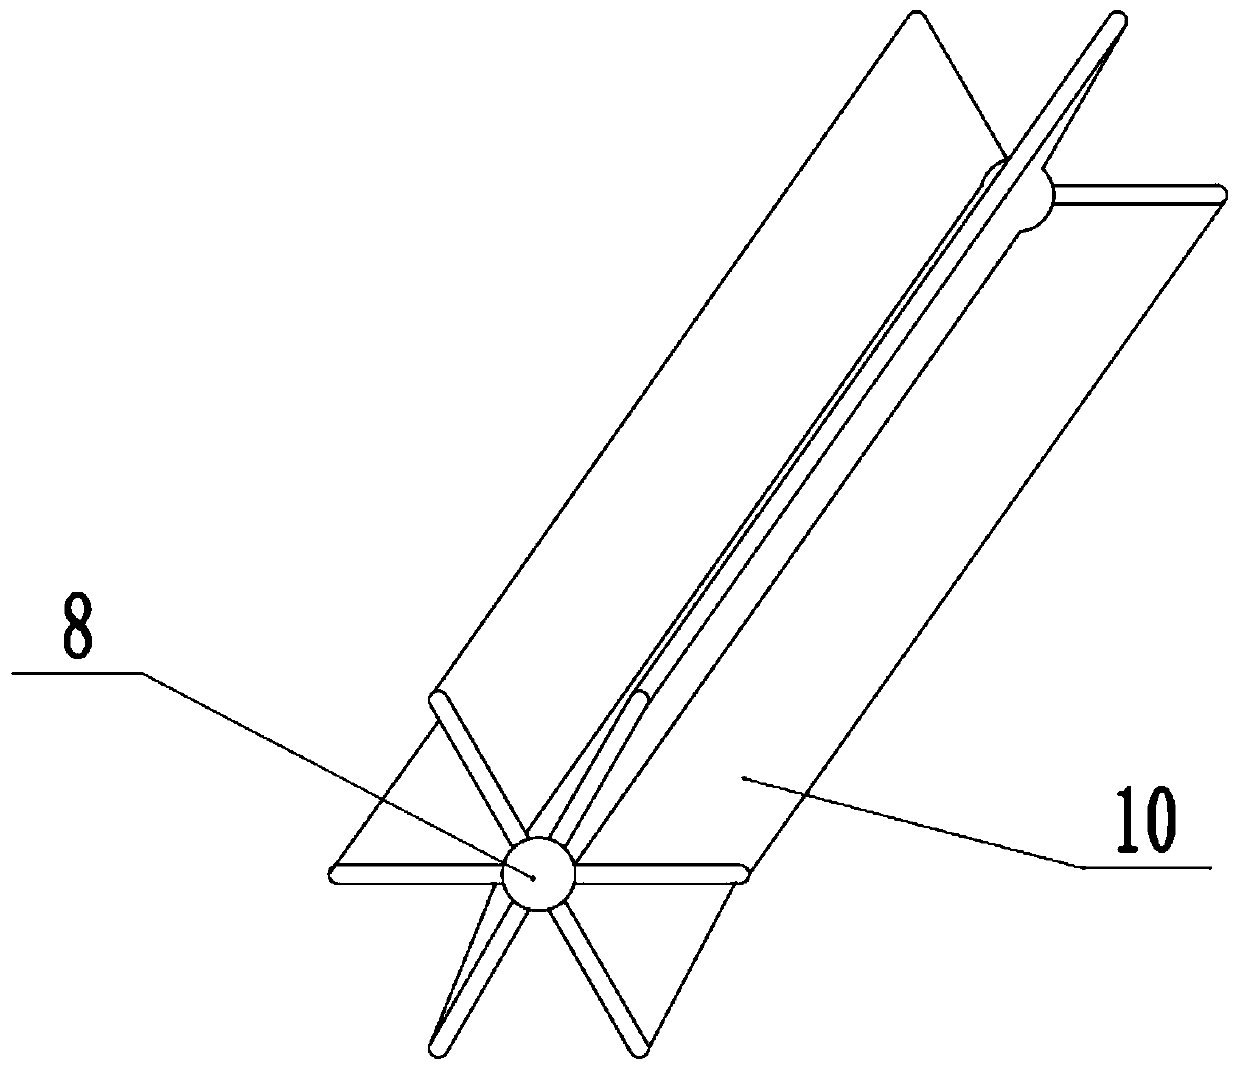 Aquatic insect collection suspension device